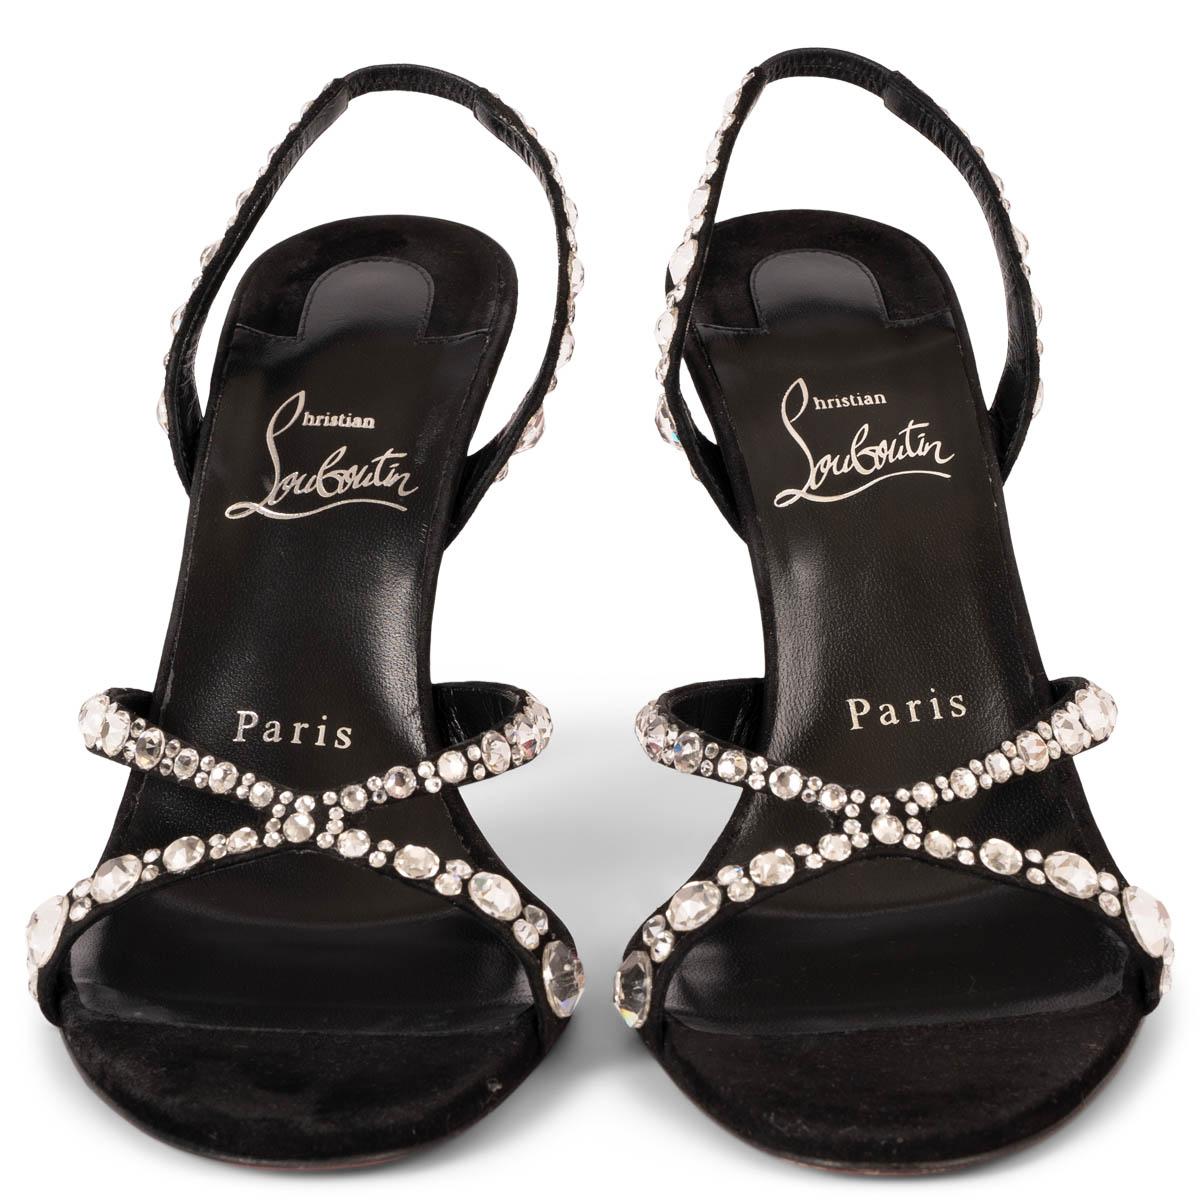 100% authentic Christian Louboutin Emilie Strass 100 sandals in black suede embellished with round crystals. Have been worn one or twice and are in excellent condition. 

Measurements
Model	1230150
Imprinted Size	37.5
Shoe Size	37.5
Inside Sole	24cm